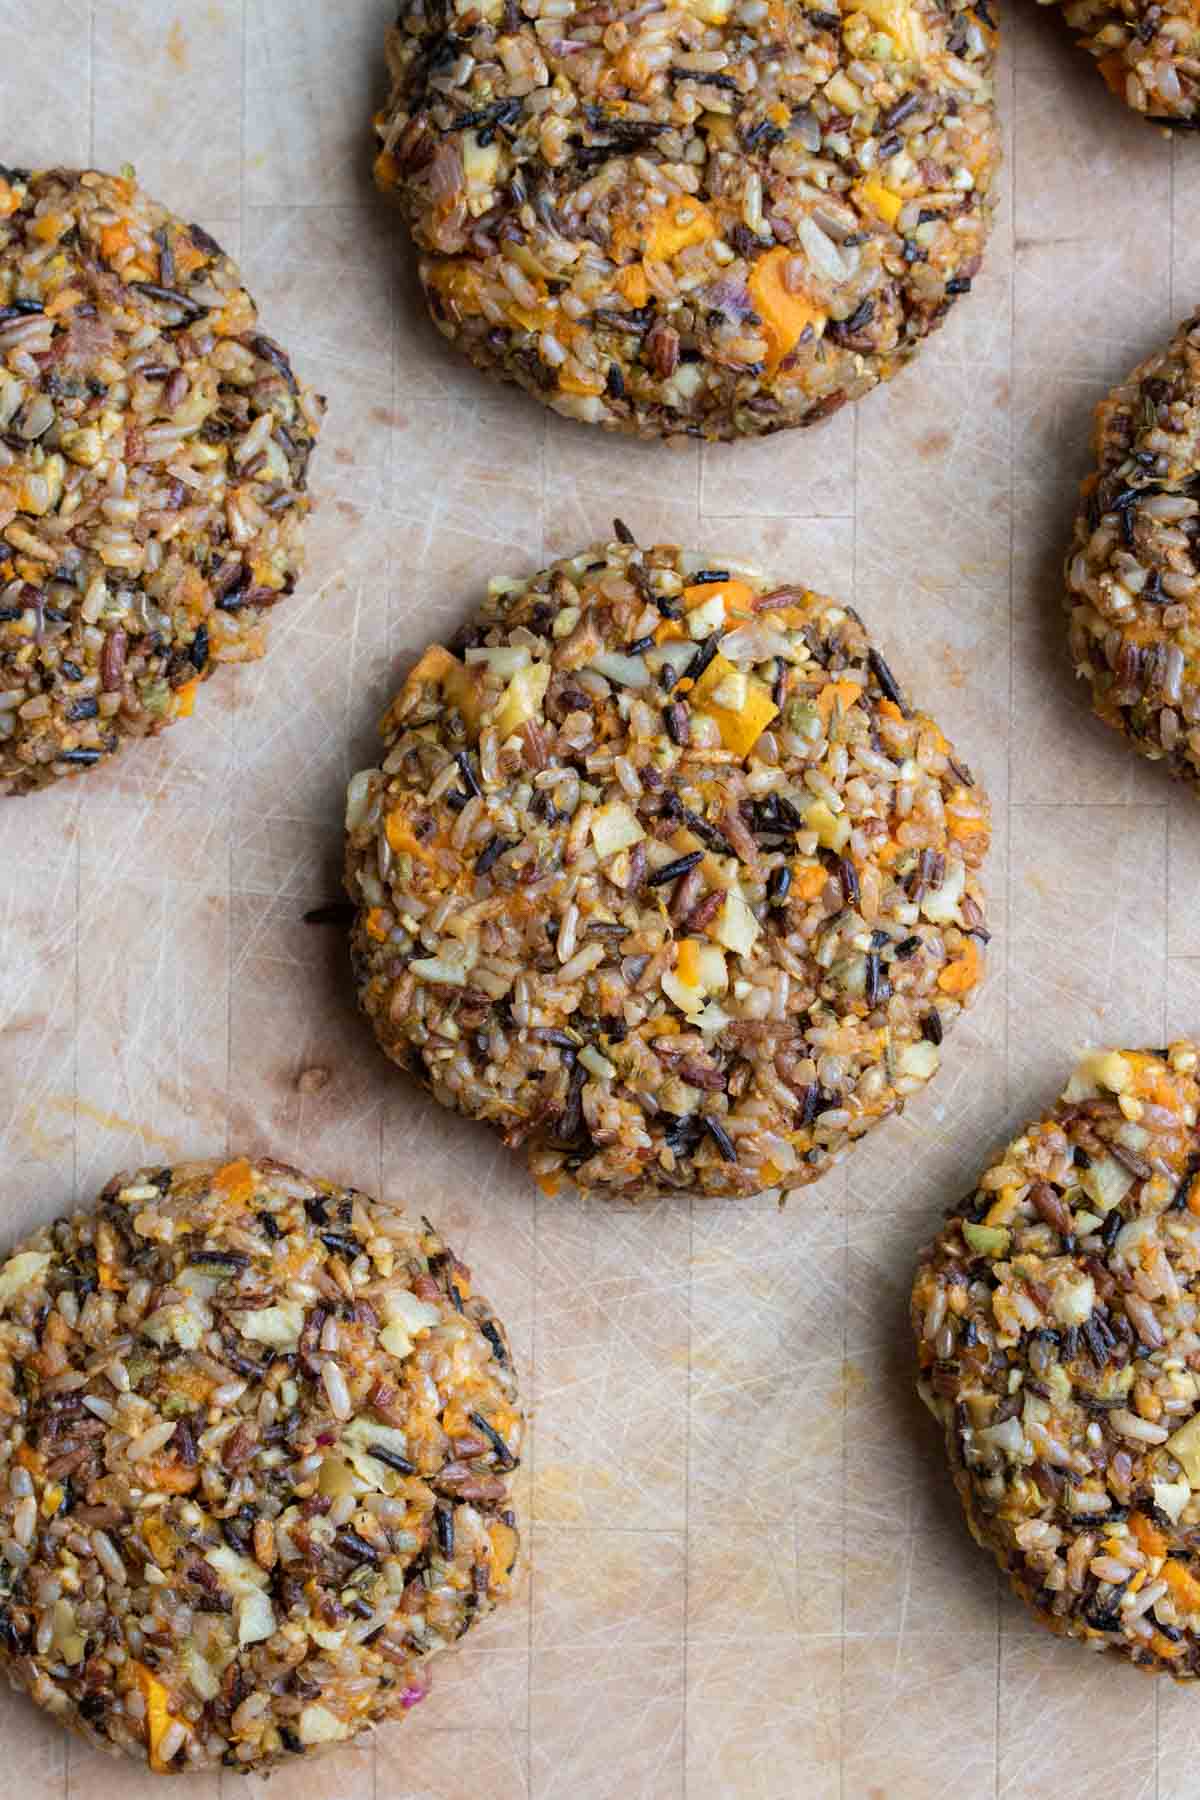 Raw butternut squash and wild rice burger patties on a wooden surface.